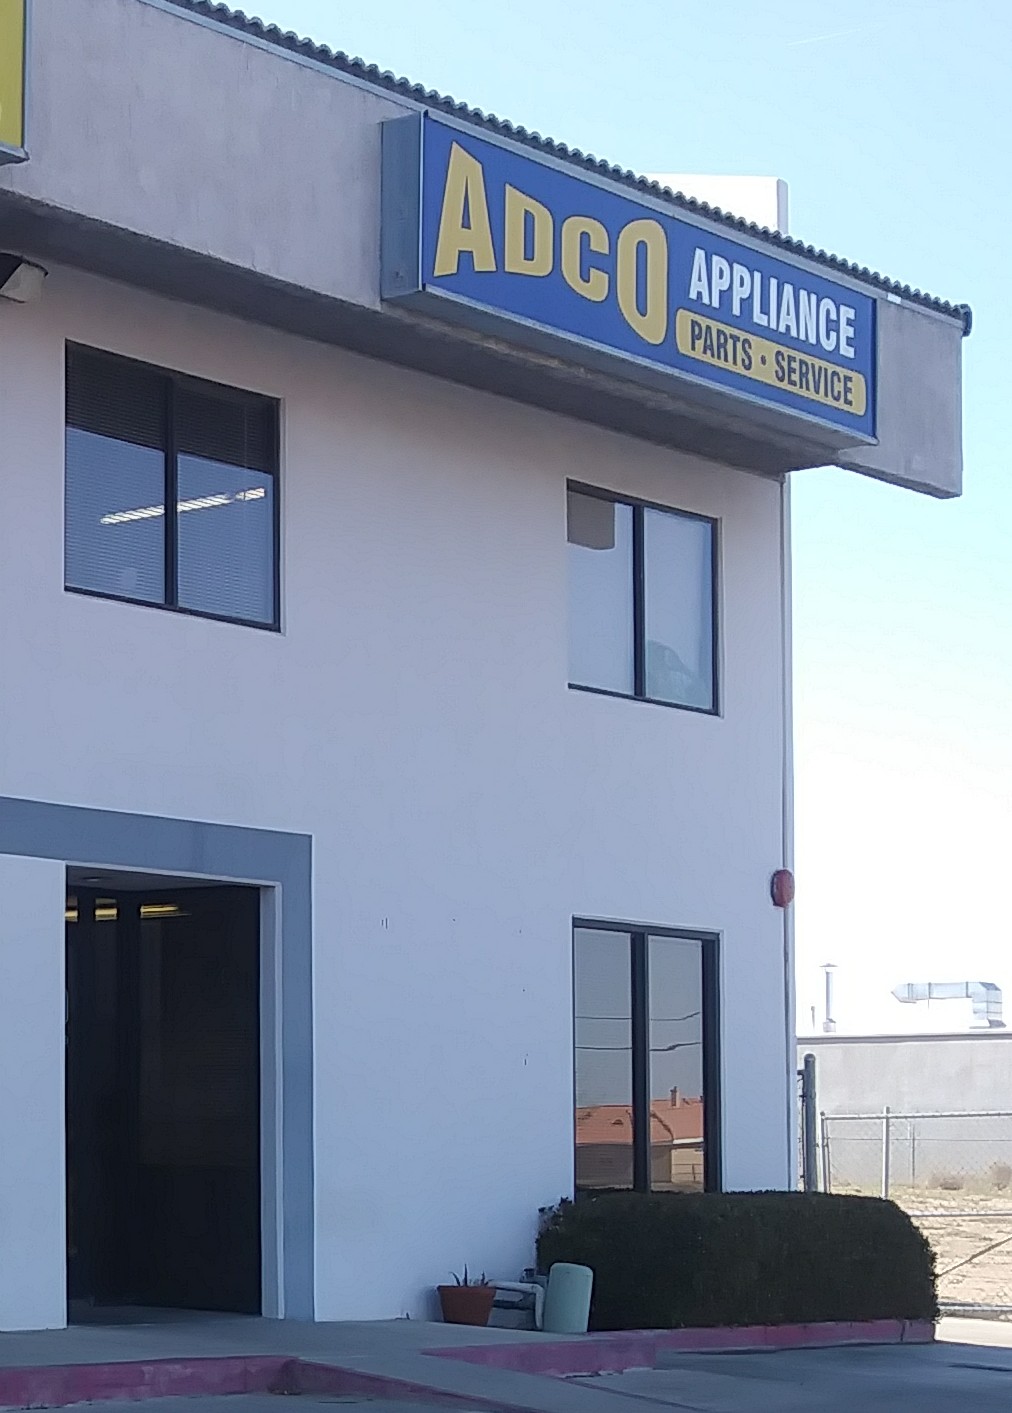 Adco Appliance Parts